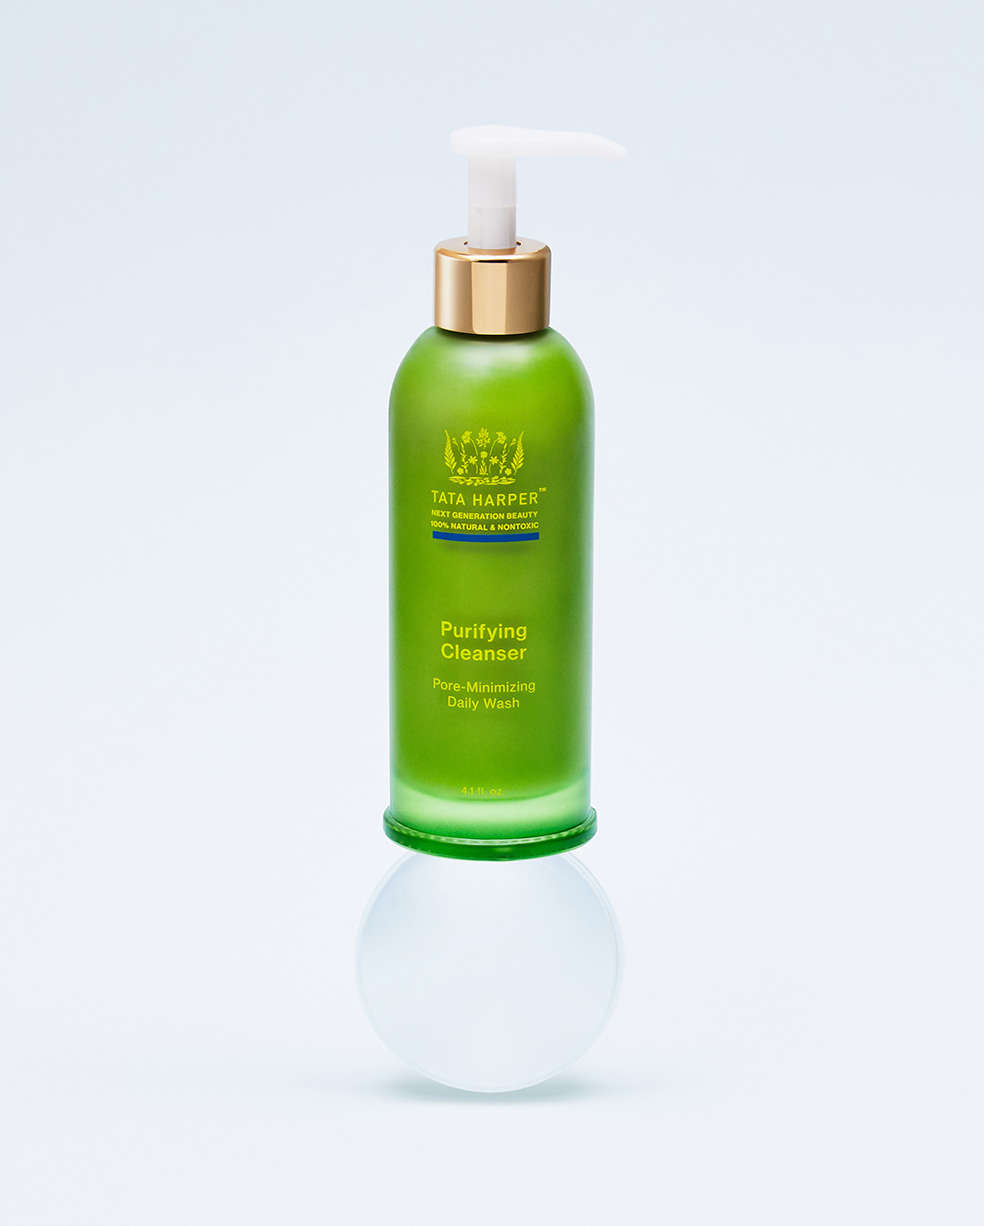 Tata Harper The Purifying Cleanser